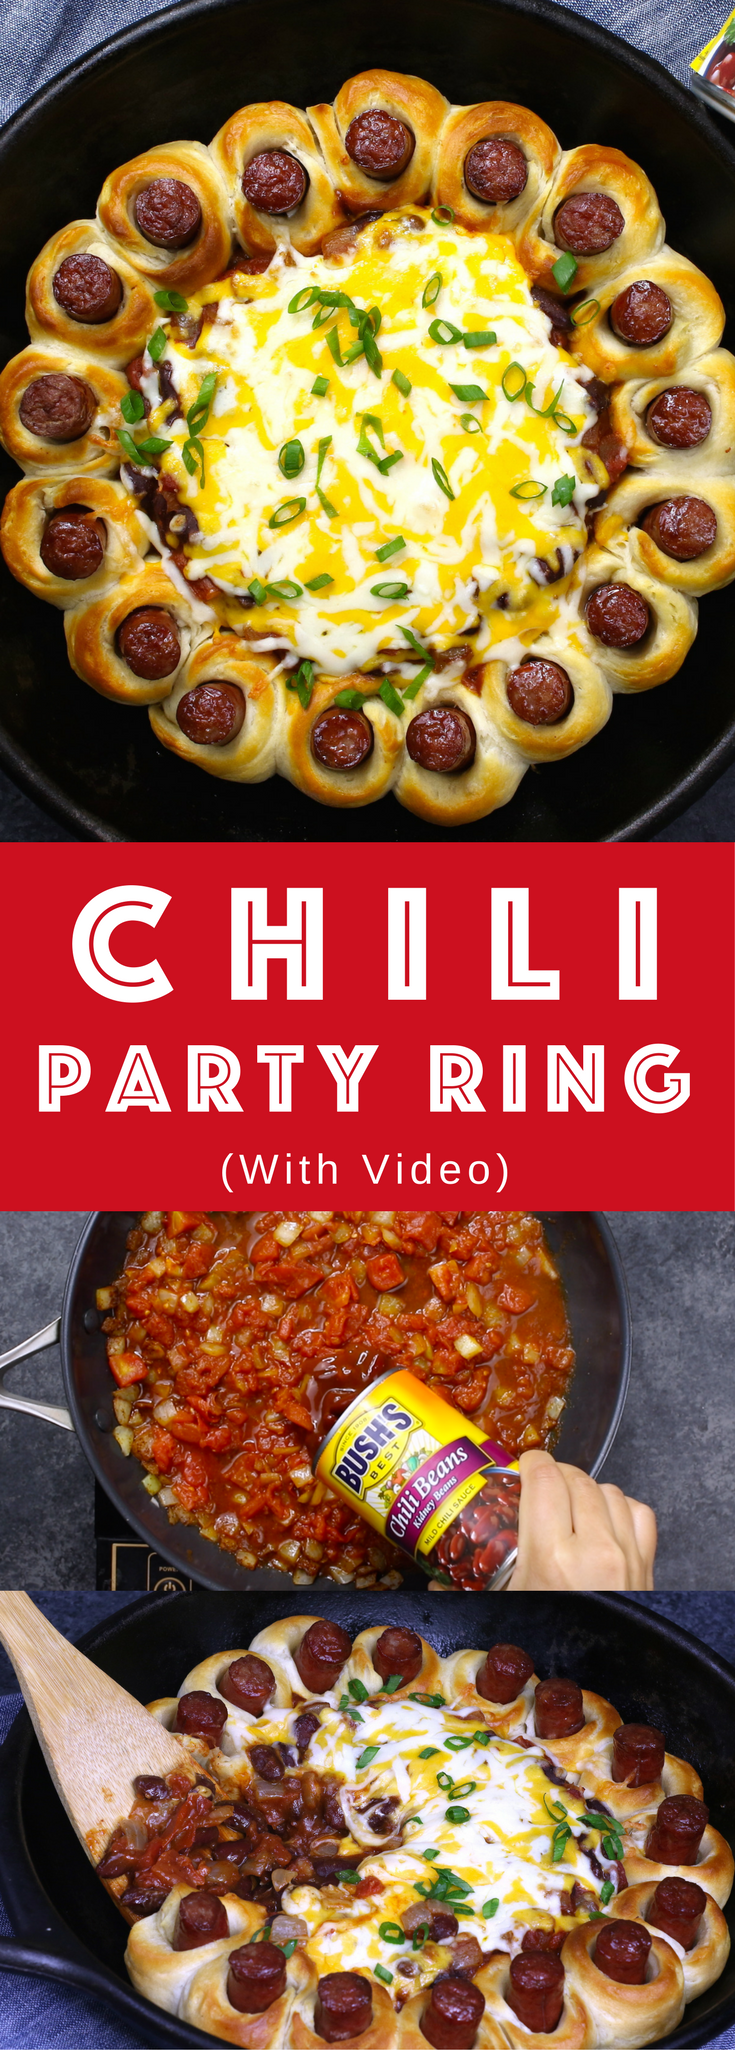 Chili Party Ring – the most delicious appetizer to share at your next party. Easy to make in only 30 minutes with a few simple ingredients: biscuit dough, your favorite wieners, onions, chili powder, cumin, Hunt’s Tomatoes, BUSH’s slow-simmered chili beans, shredded cheese and green onions. So good. Video recipe. #AD